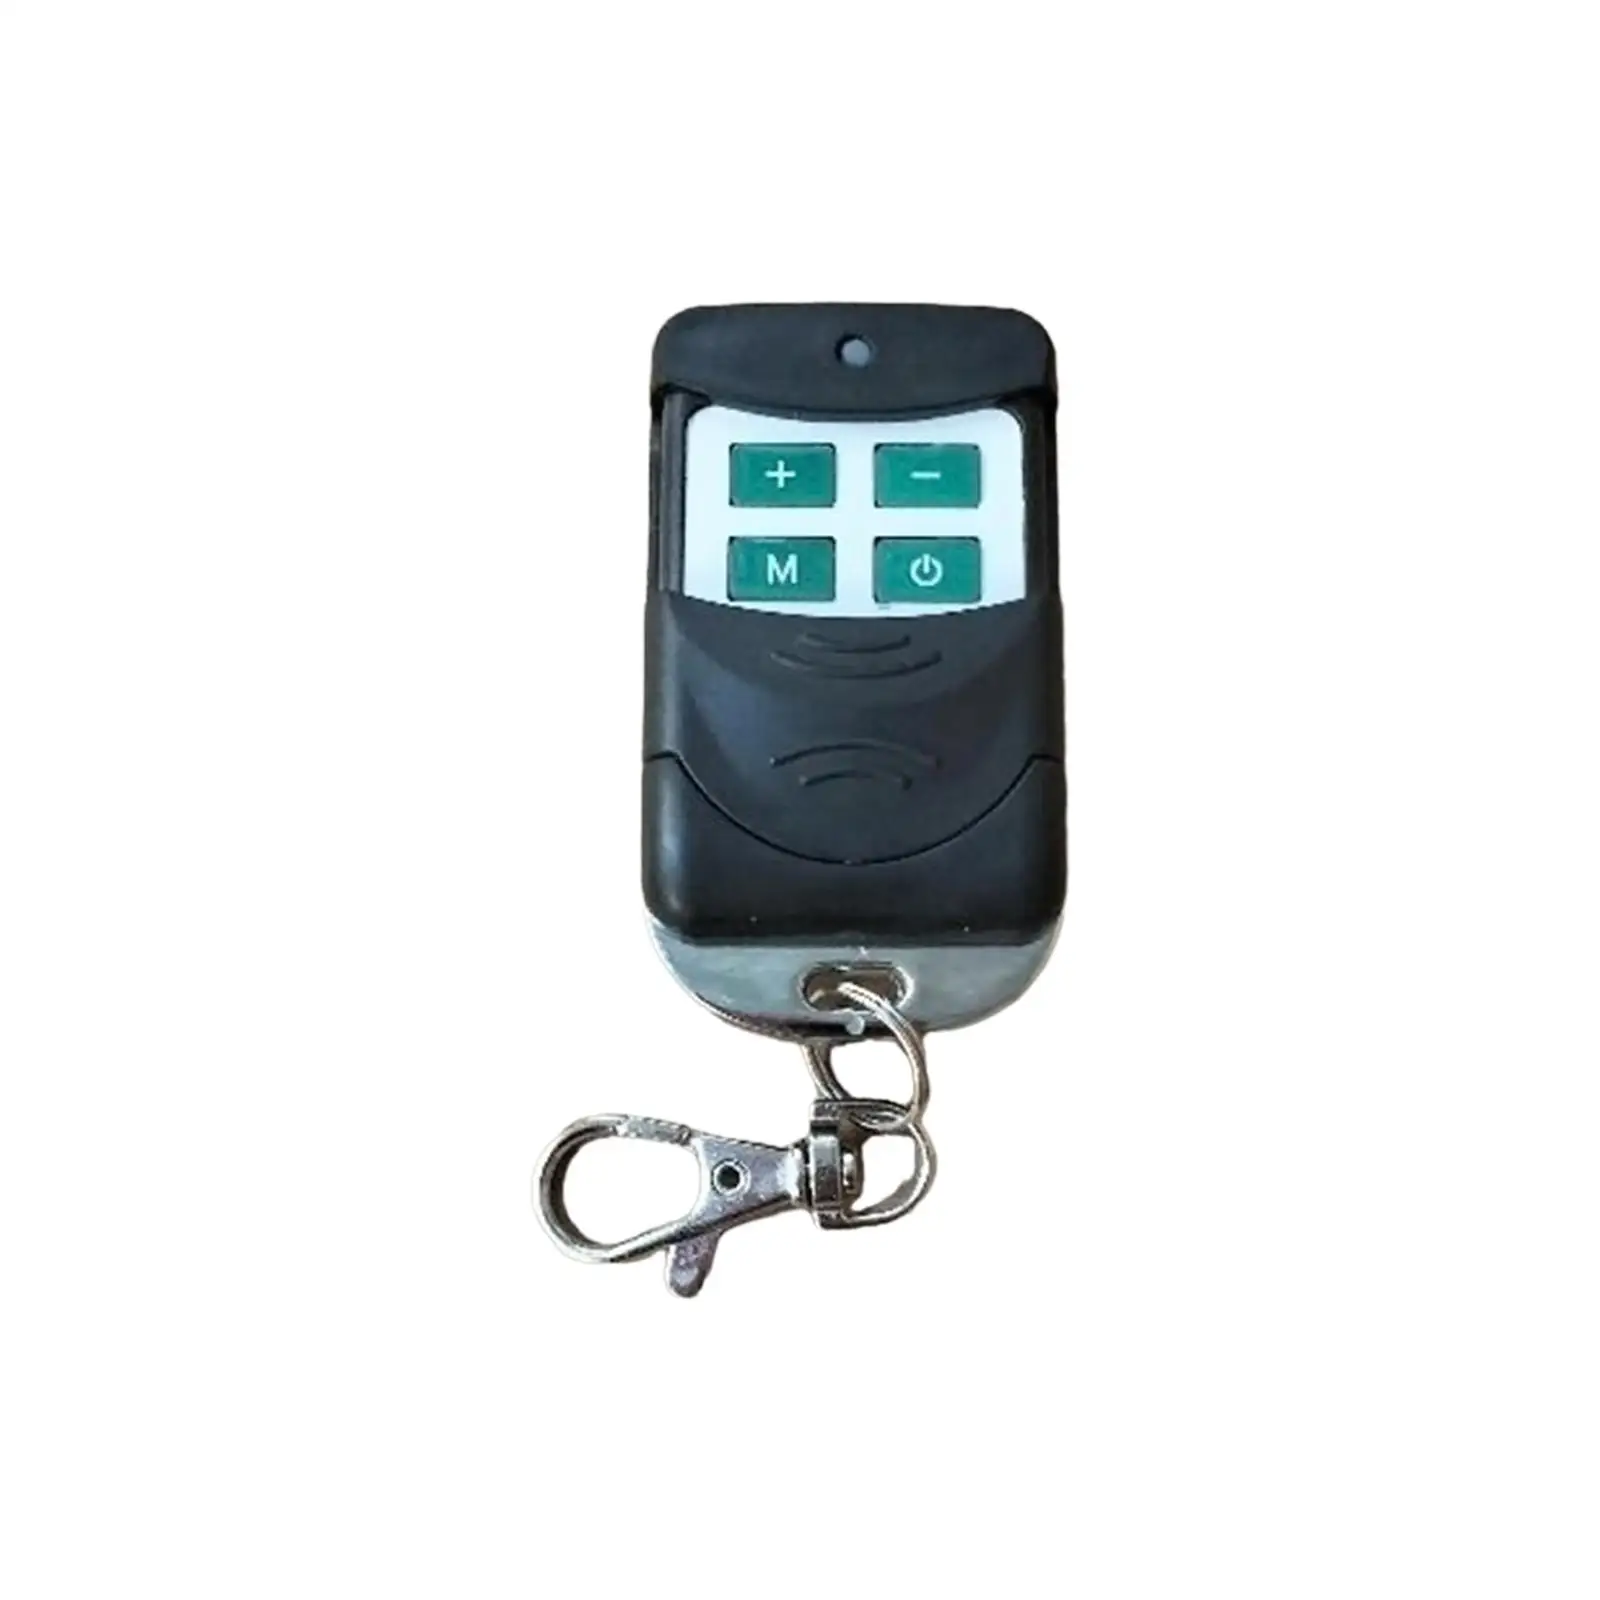 Car Parking Heater Remote Control for Heater Controller Motorhomes RV